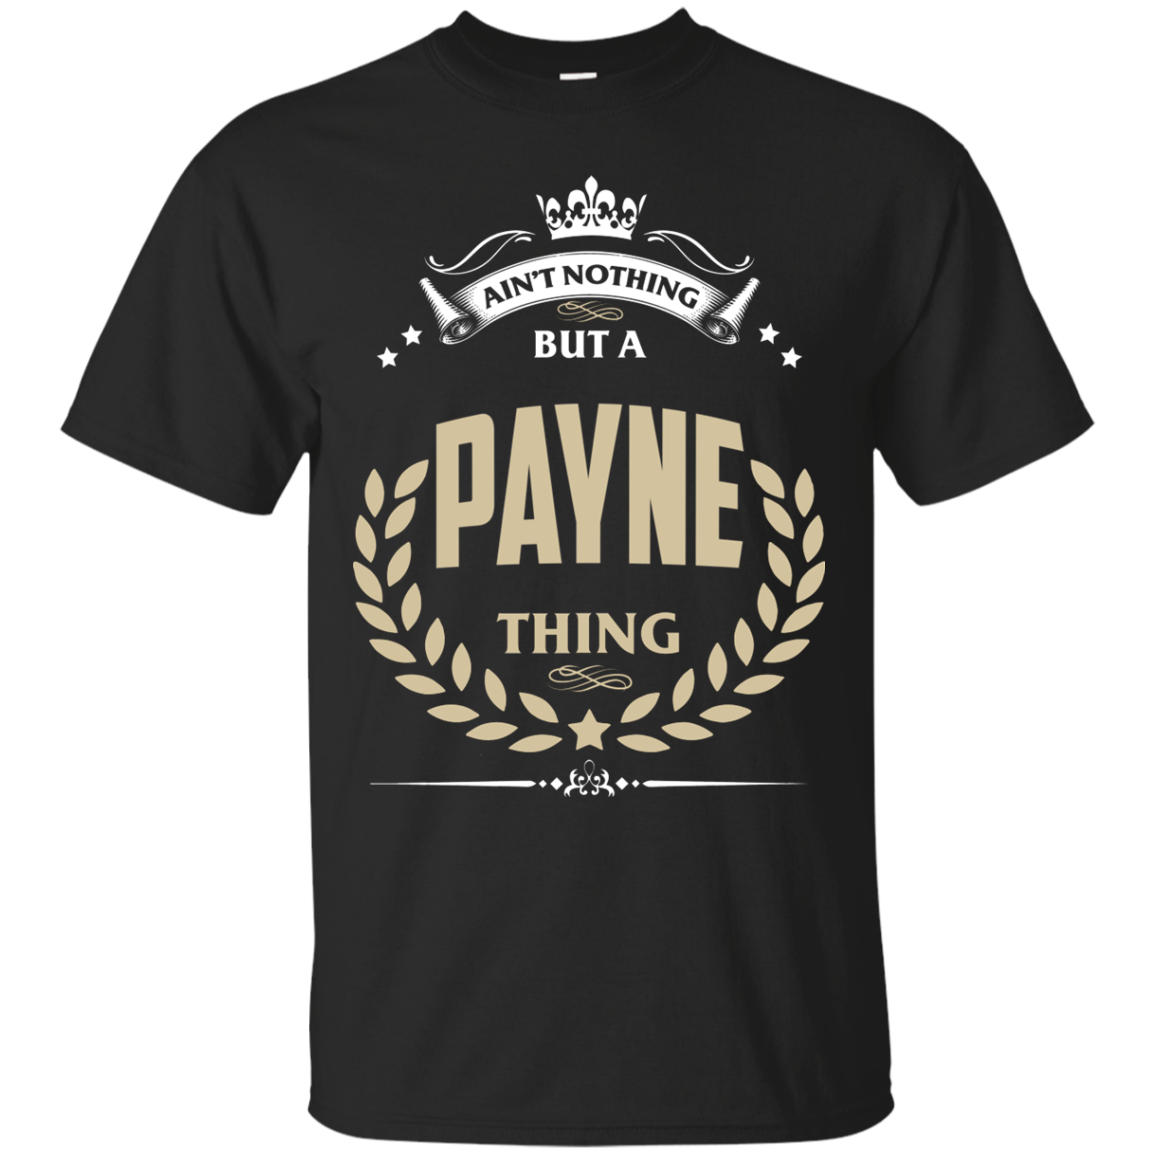 Payne Shirts Ain't Nothing But A Payne Thing - Teesmiley